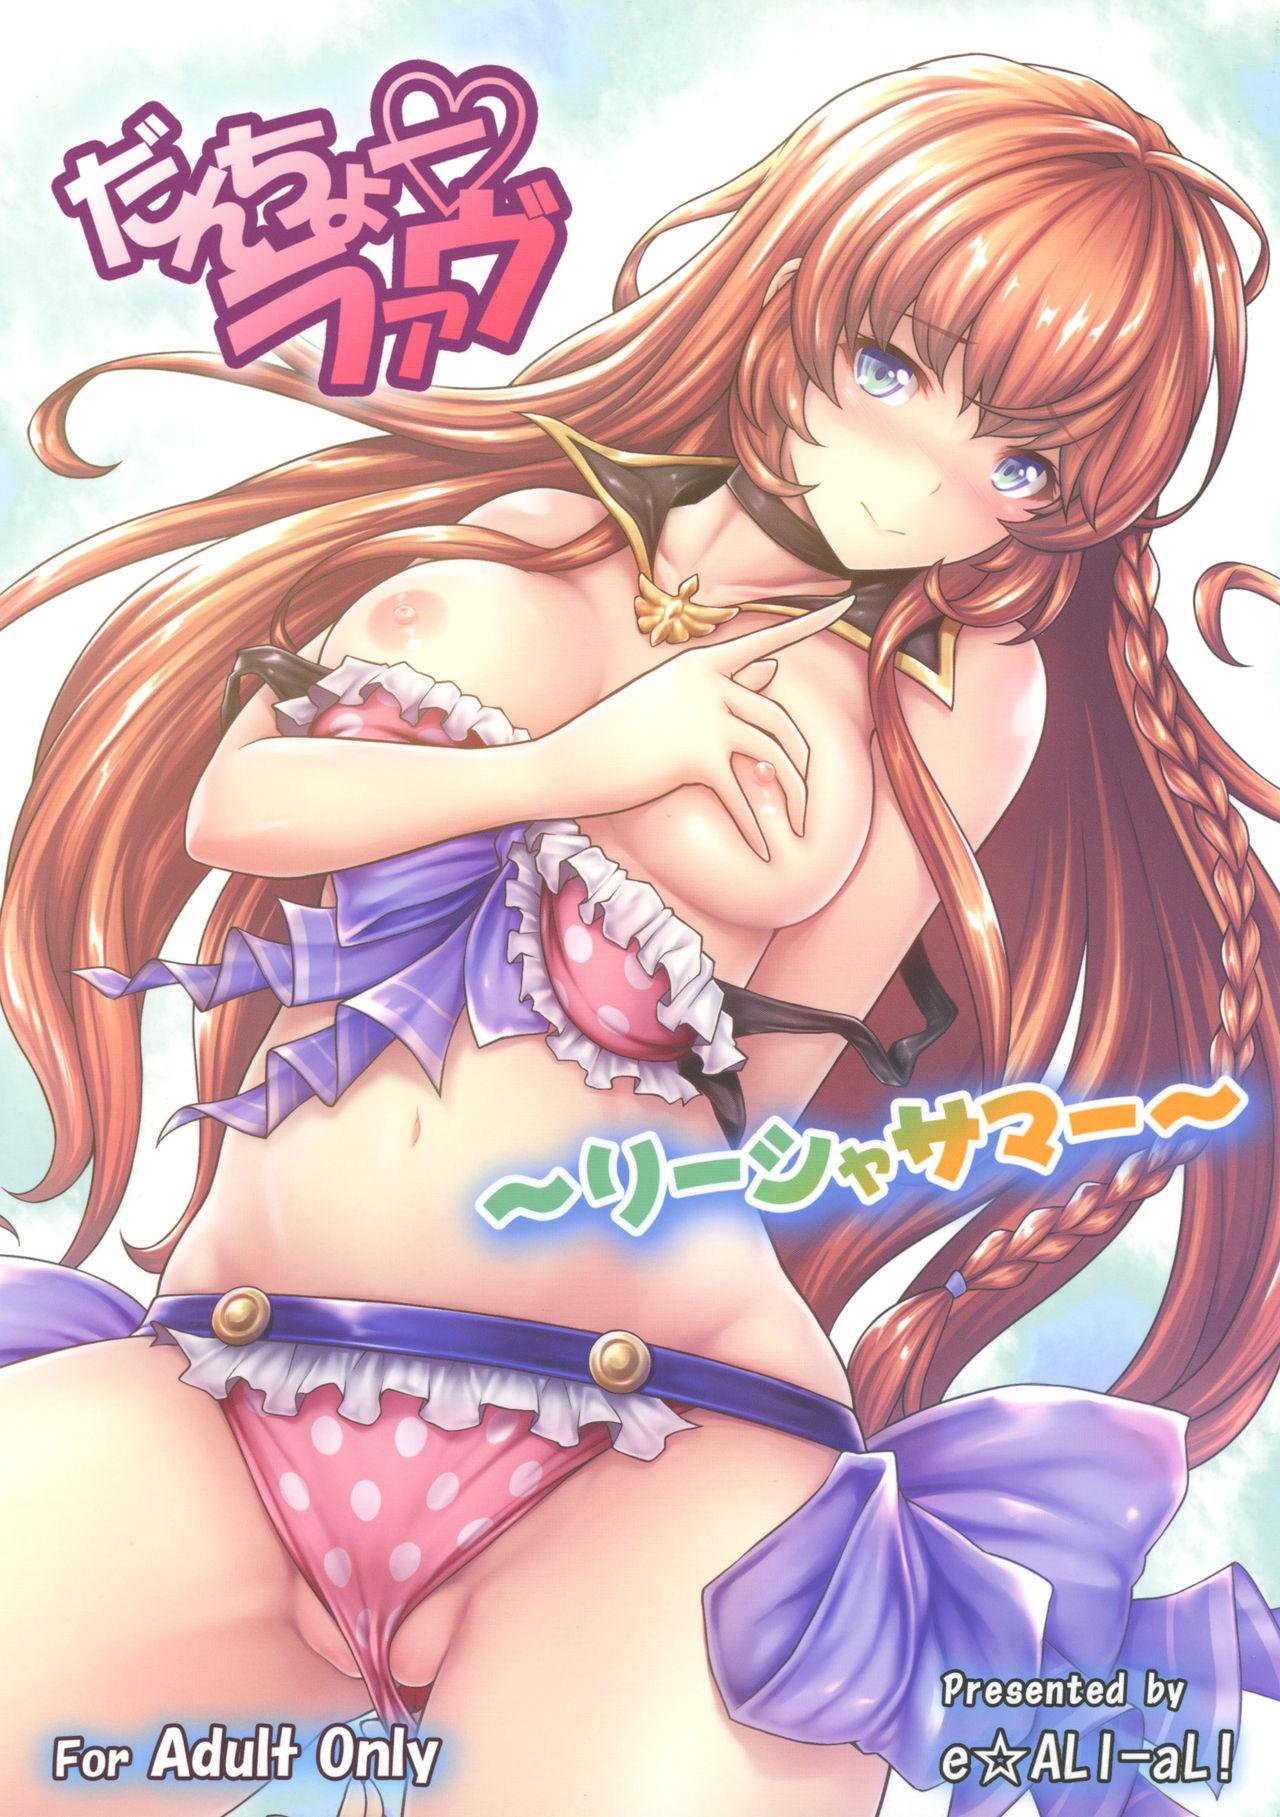 Jerking Off Danchou Love - Granblue fantasy Free 18 Year Old Porn - Picture 1